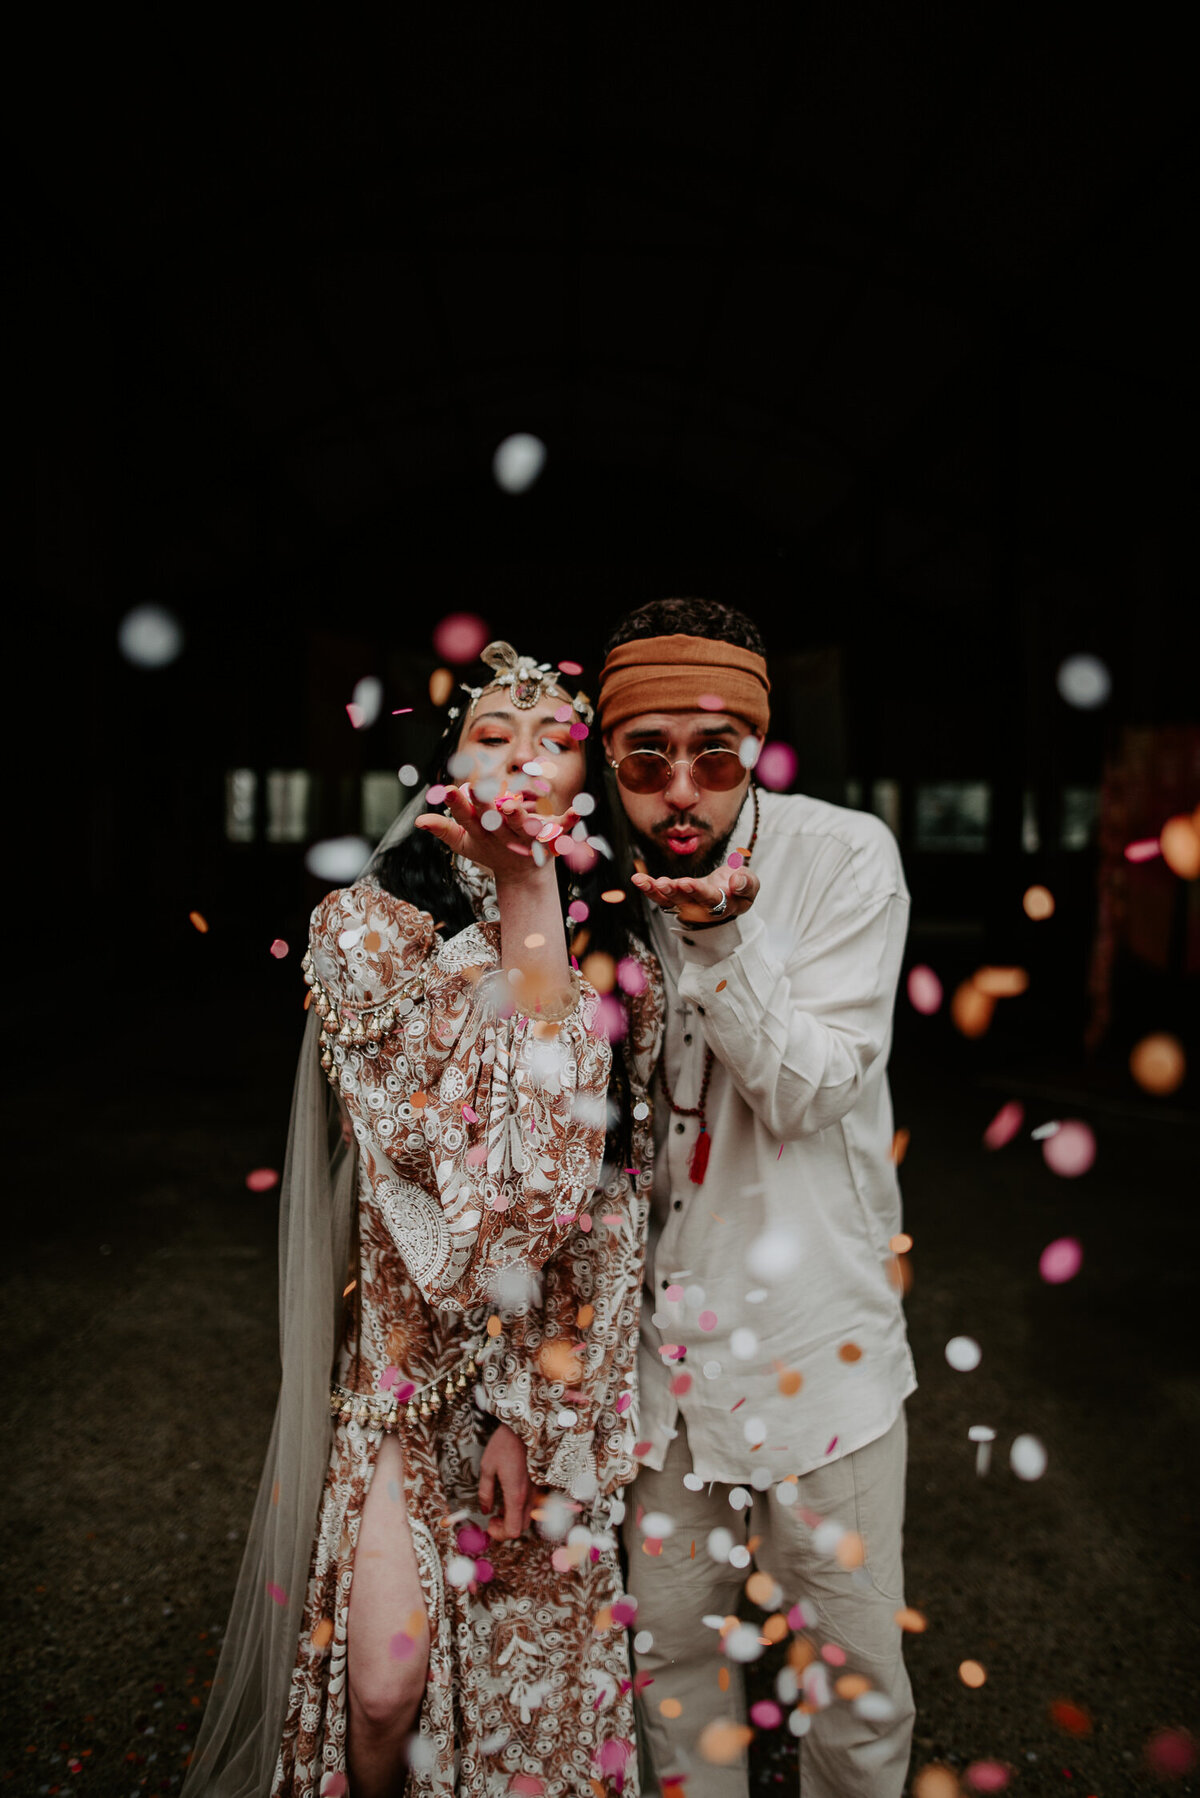 A bride and groom blow confetti into the camera at Happy Valley Norfolk. The wedding was styled with a 70s vibe.